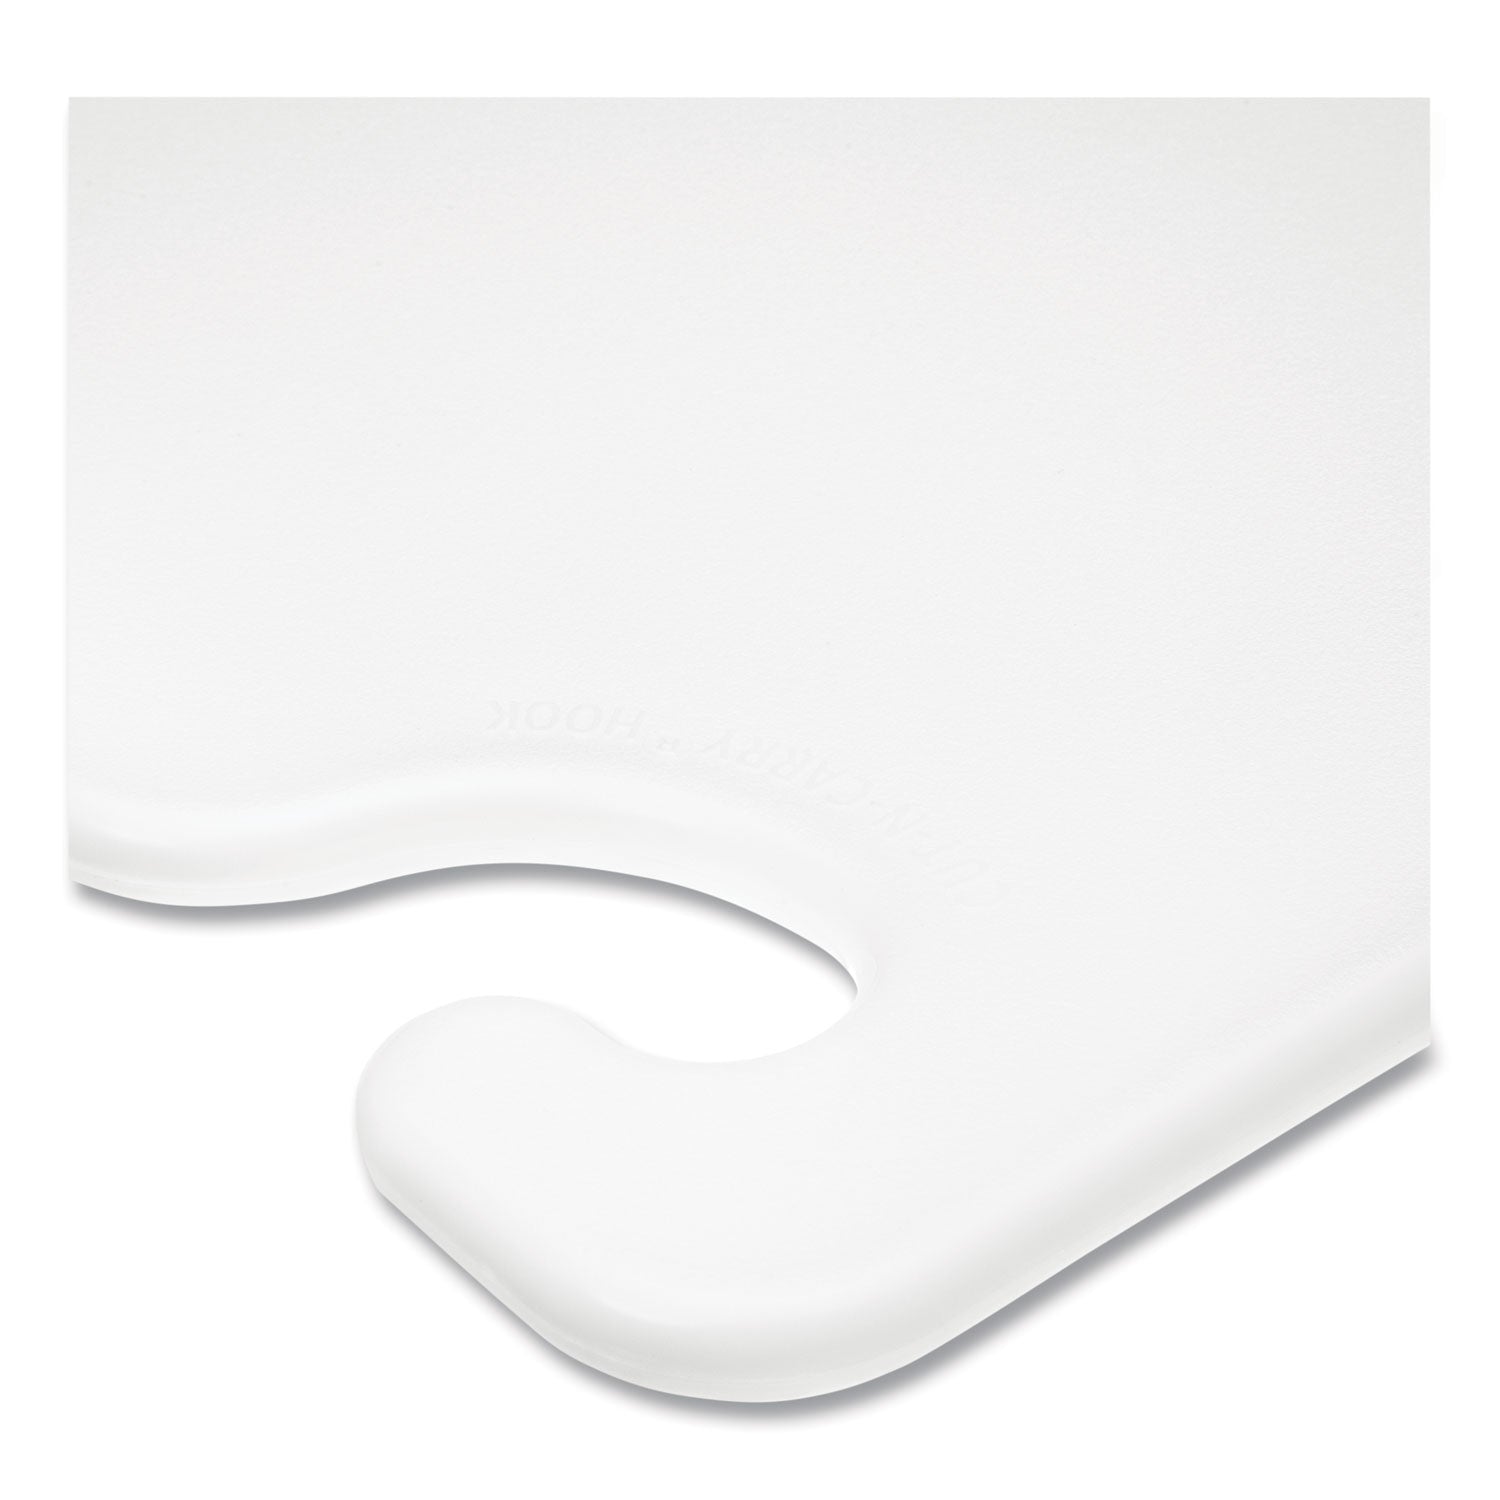 cut-n-carry-color-cutting-boards-plastic-20-x-15-x-05-white_sjmcb152012wh - 5